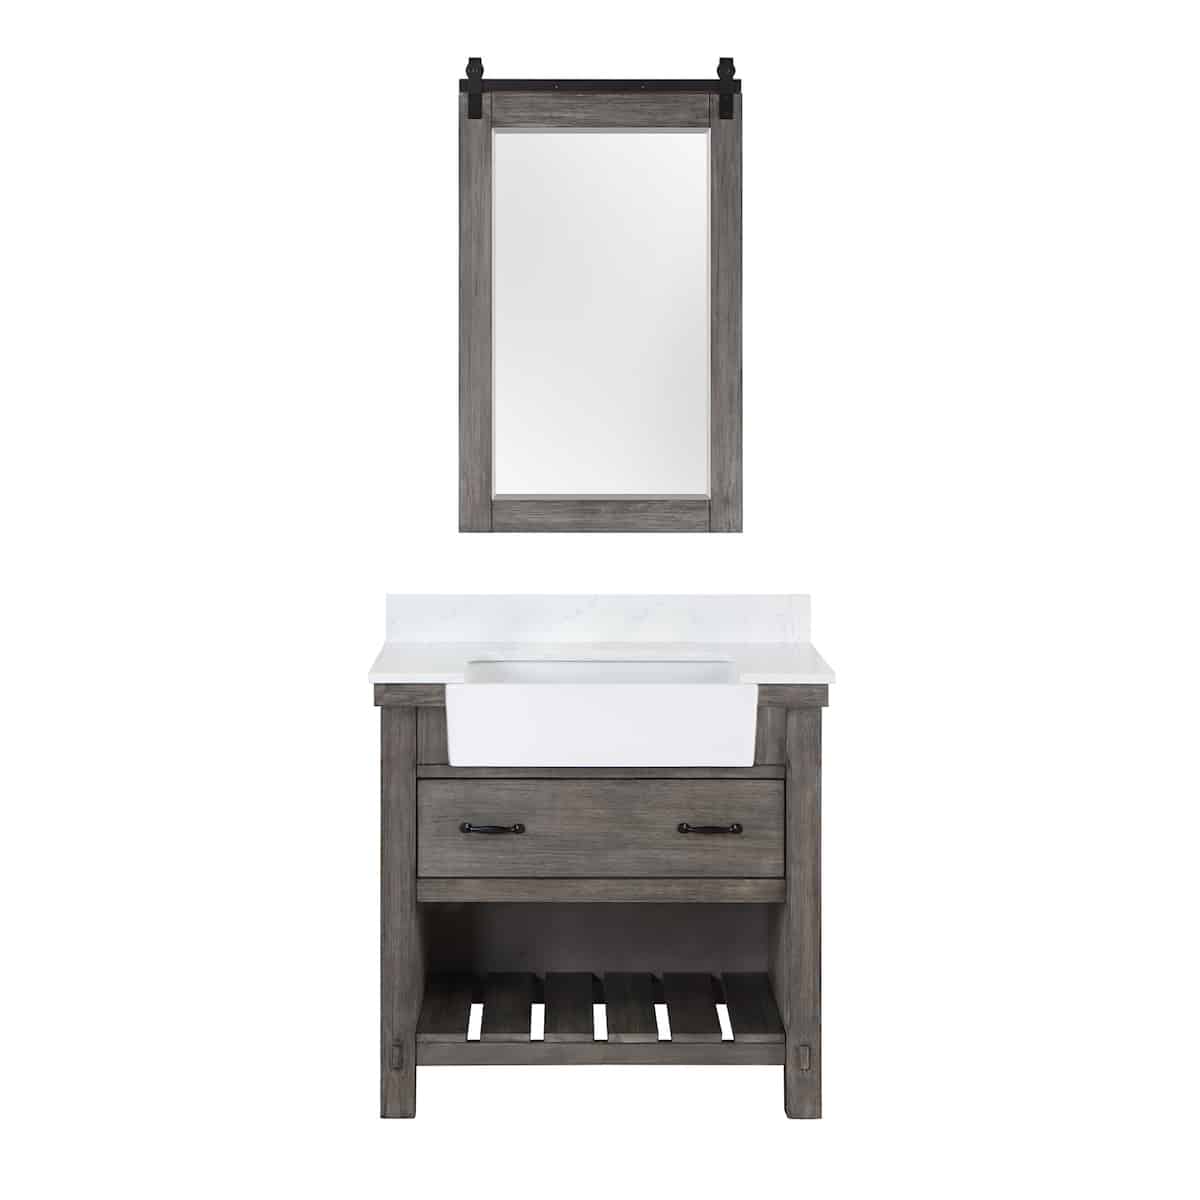 Vinnova-Villareal-36-Inch-Freestanding-Single-Bath-Vanity-in-Classical-Grey-with-Composite-Stone-Top-in-White-with-White-Farmhouse-Basin-With-Mirror-701636-CR-GW